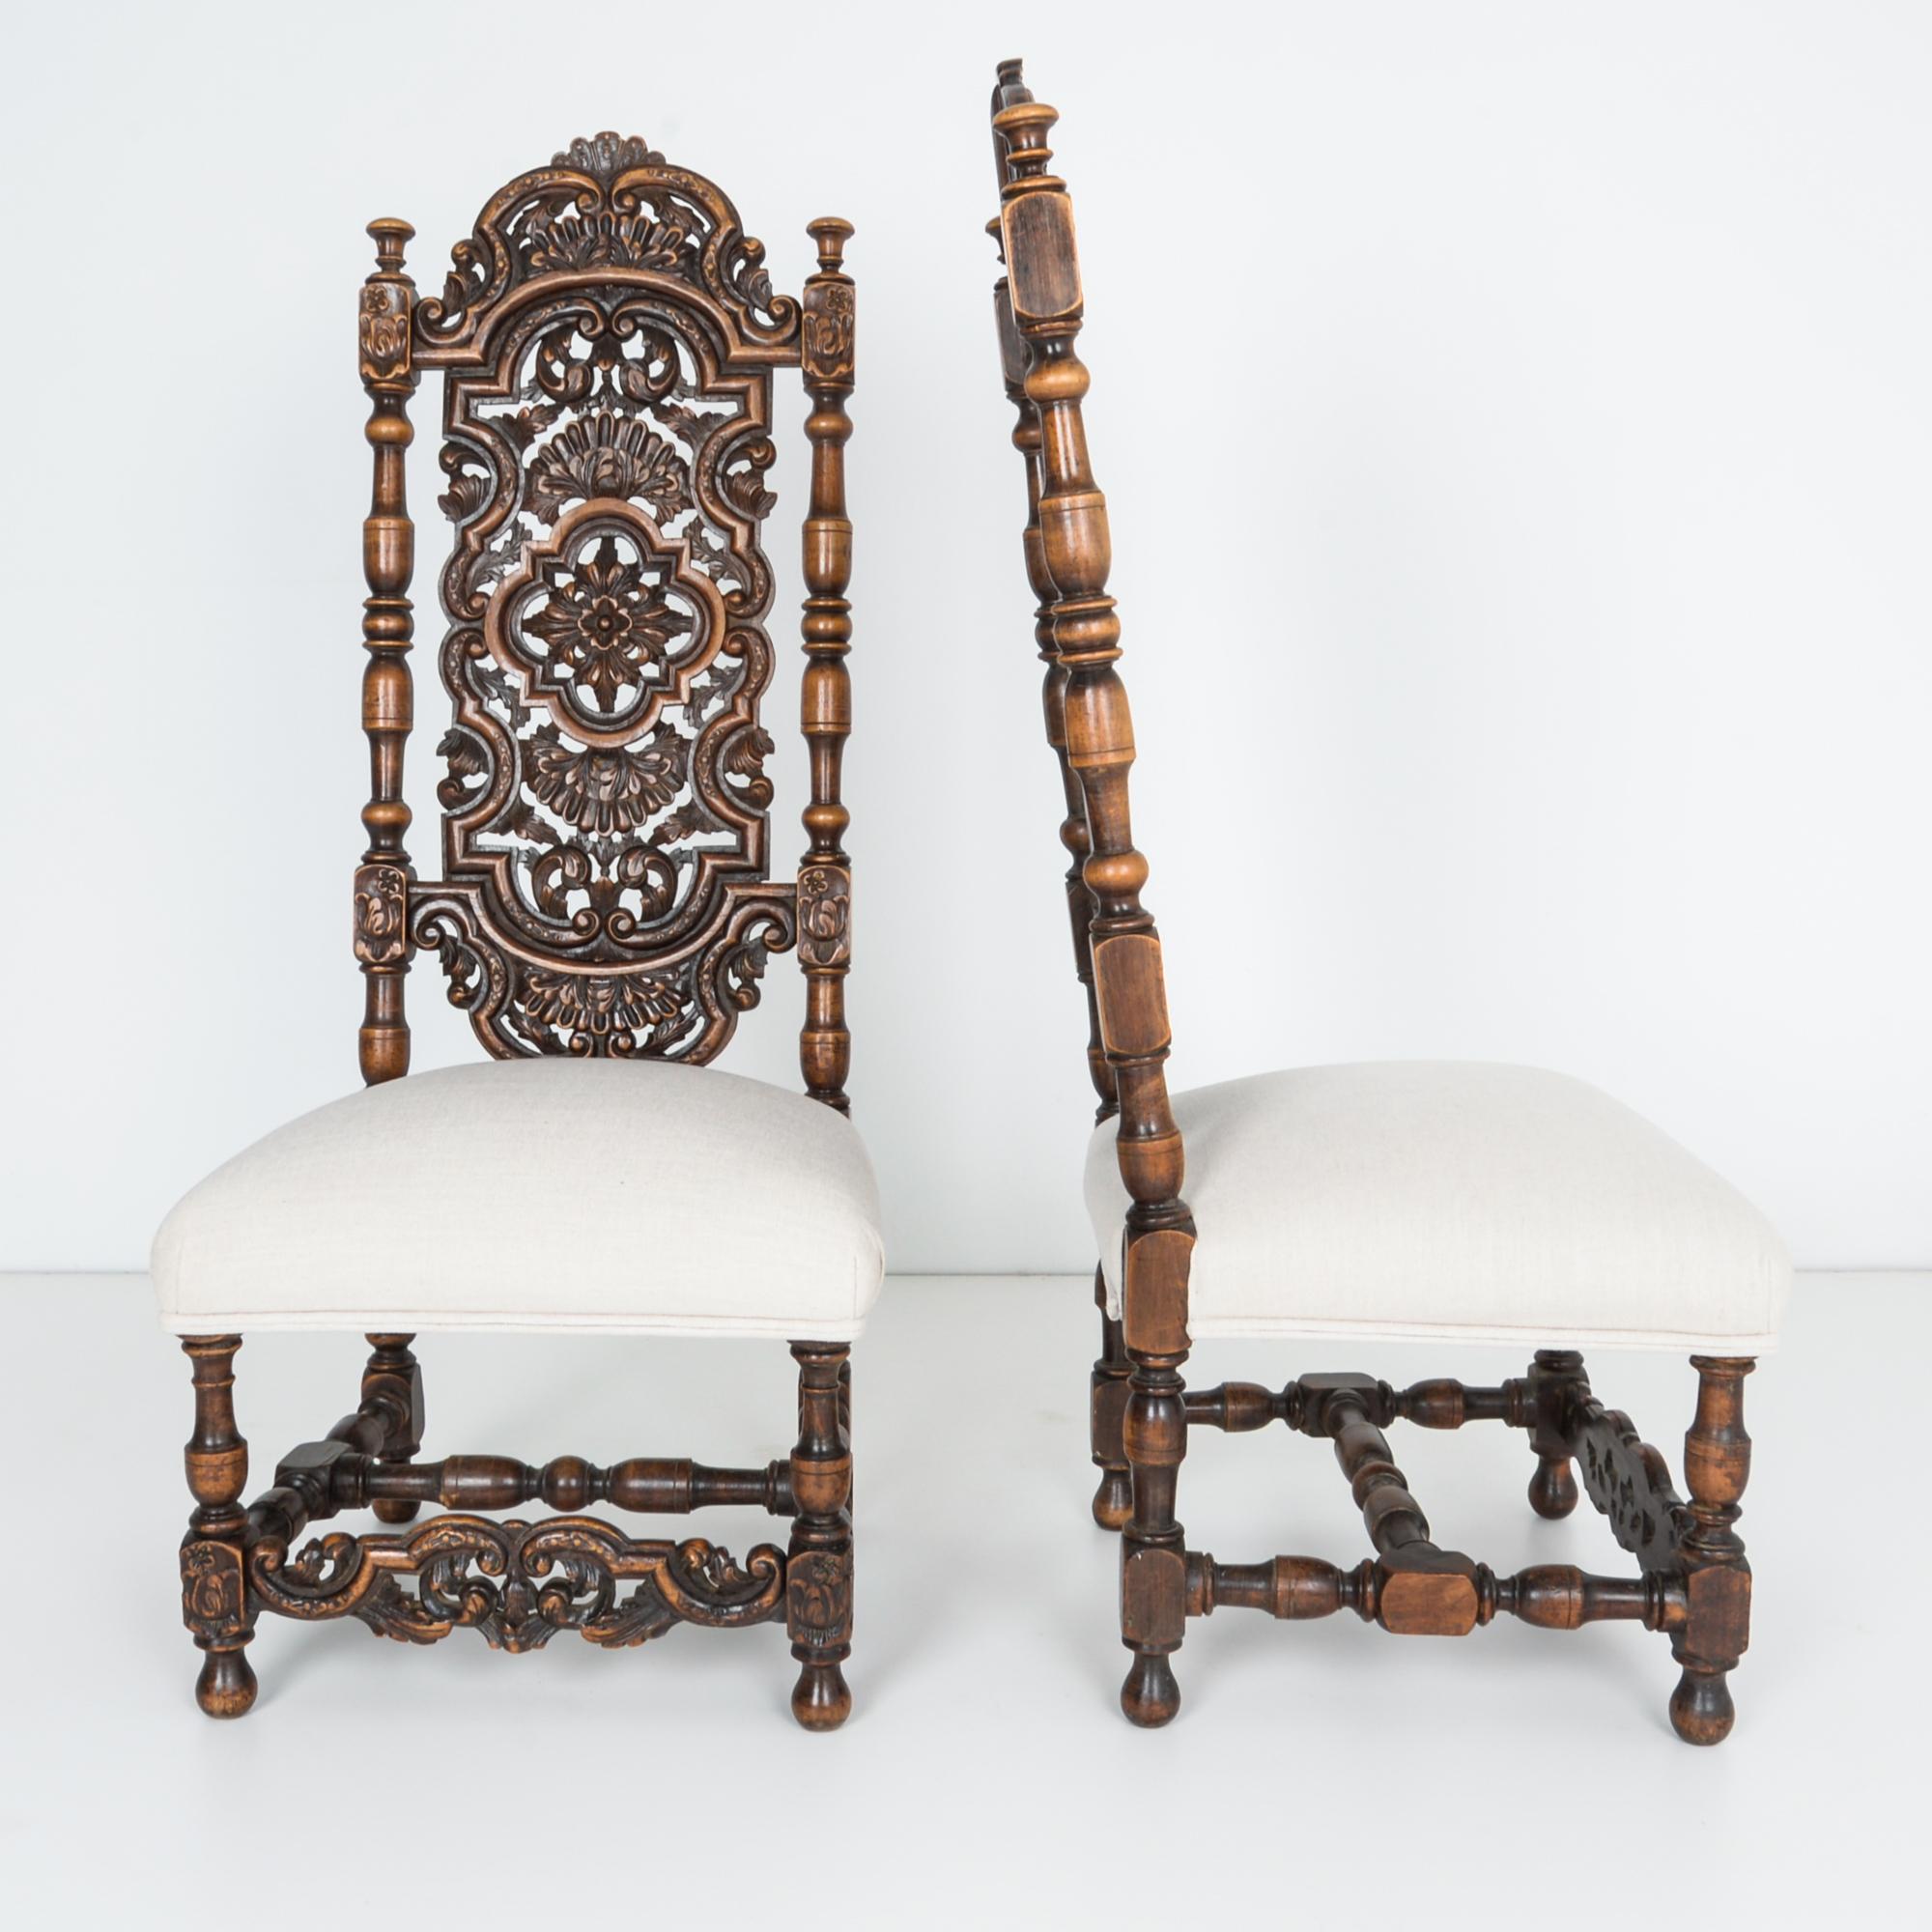 Ornate high-backed upholstered chairs from France, circa 1880. Inspired by the decorative forms of formal French furniture, this chair features elaborate turned and carved supports, with a Louis XVI inspired chair back, and a decorative front